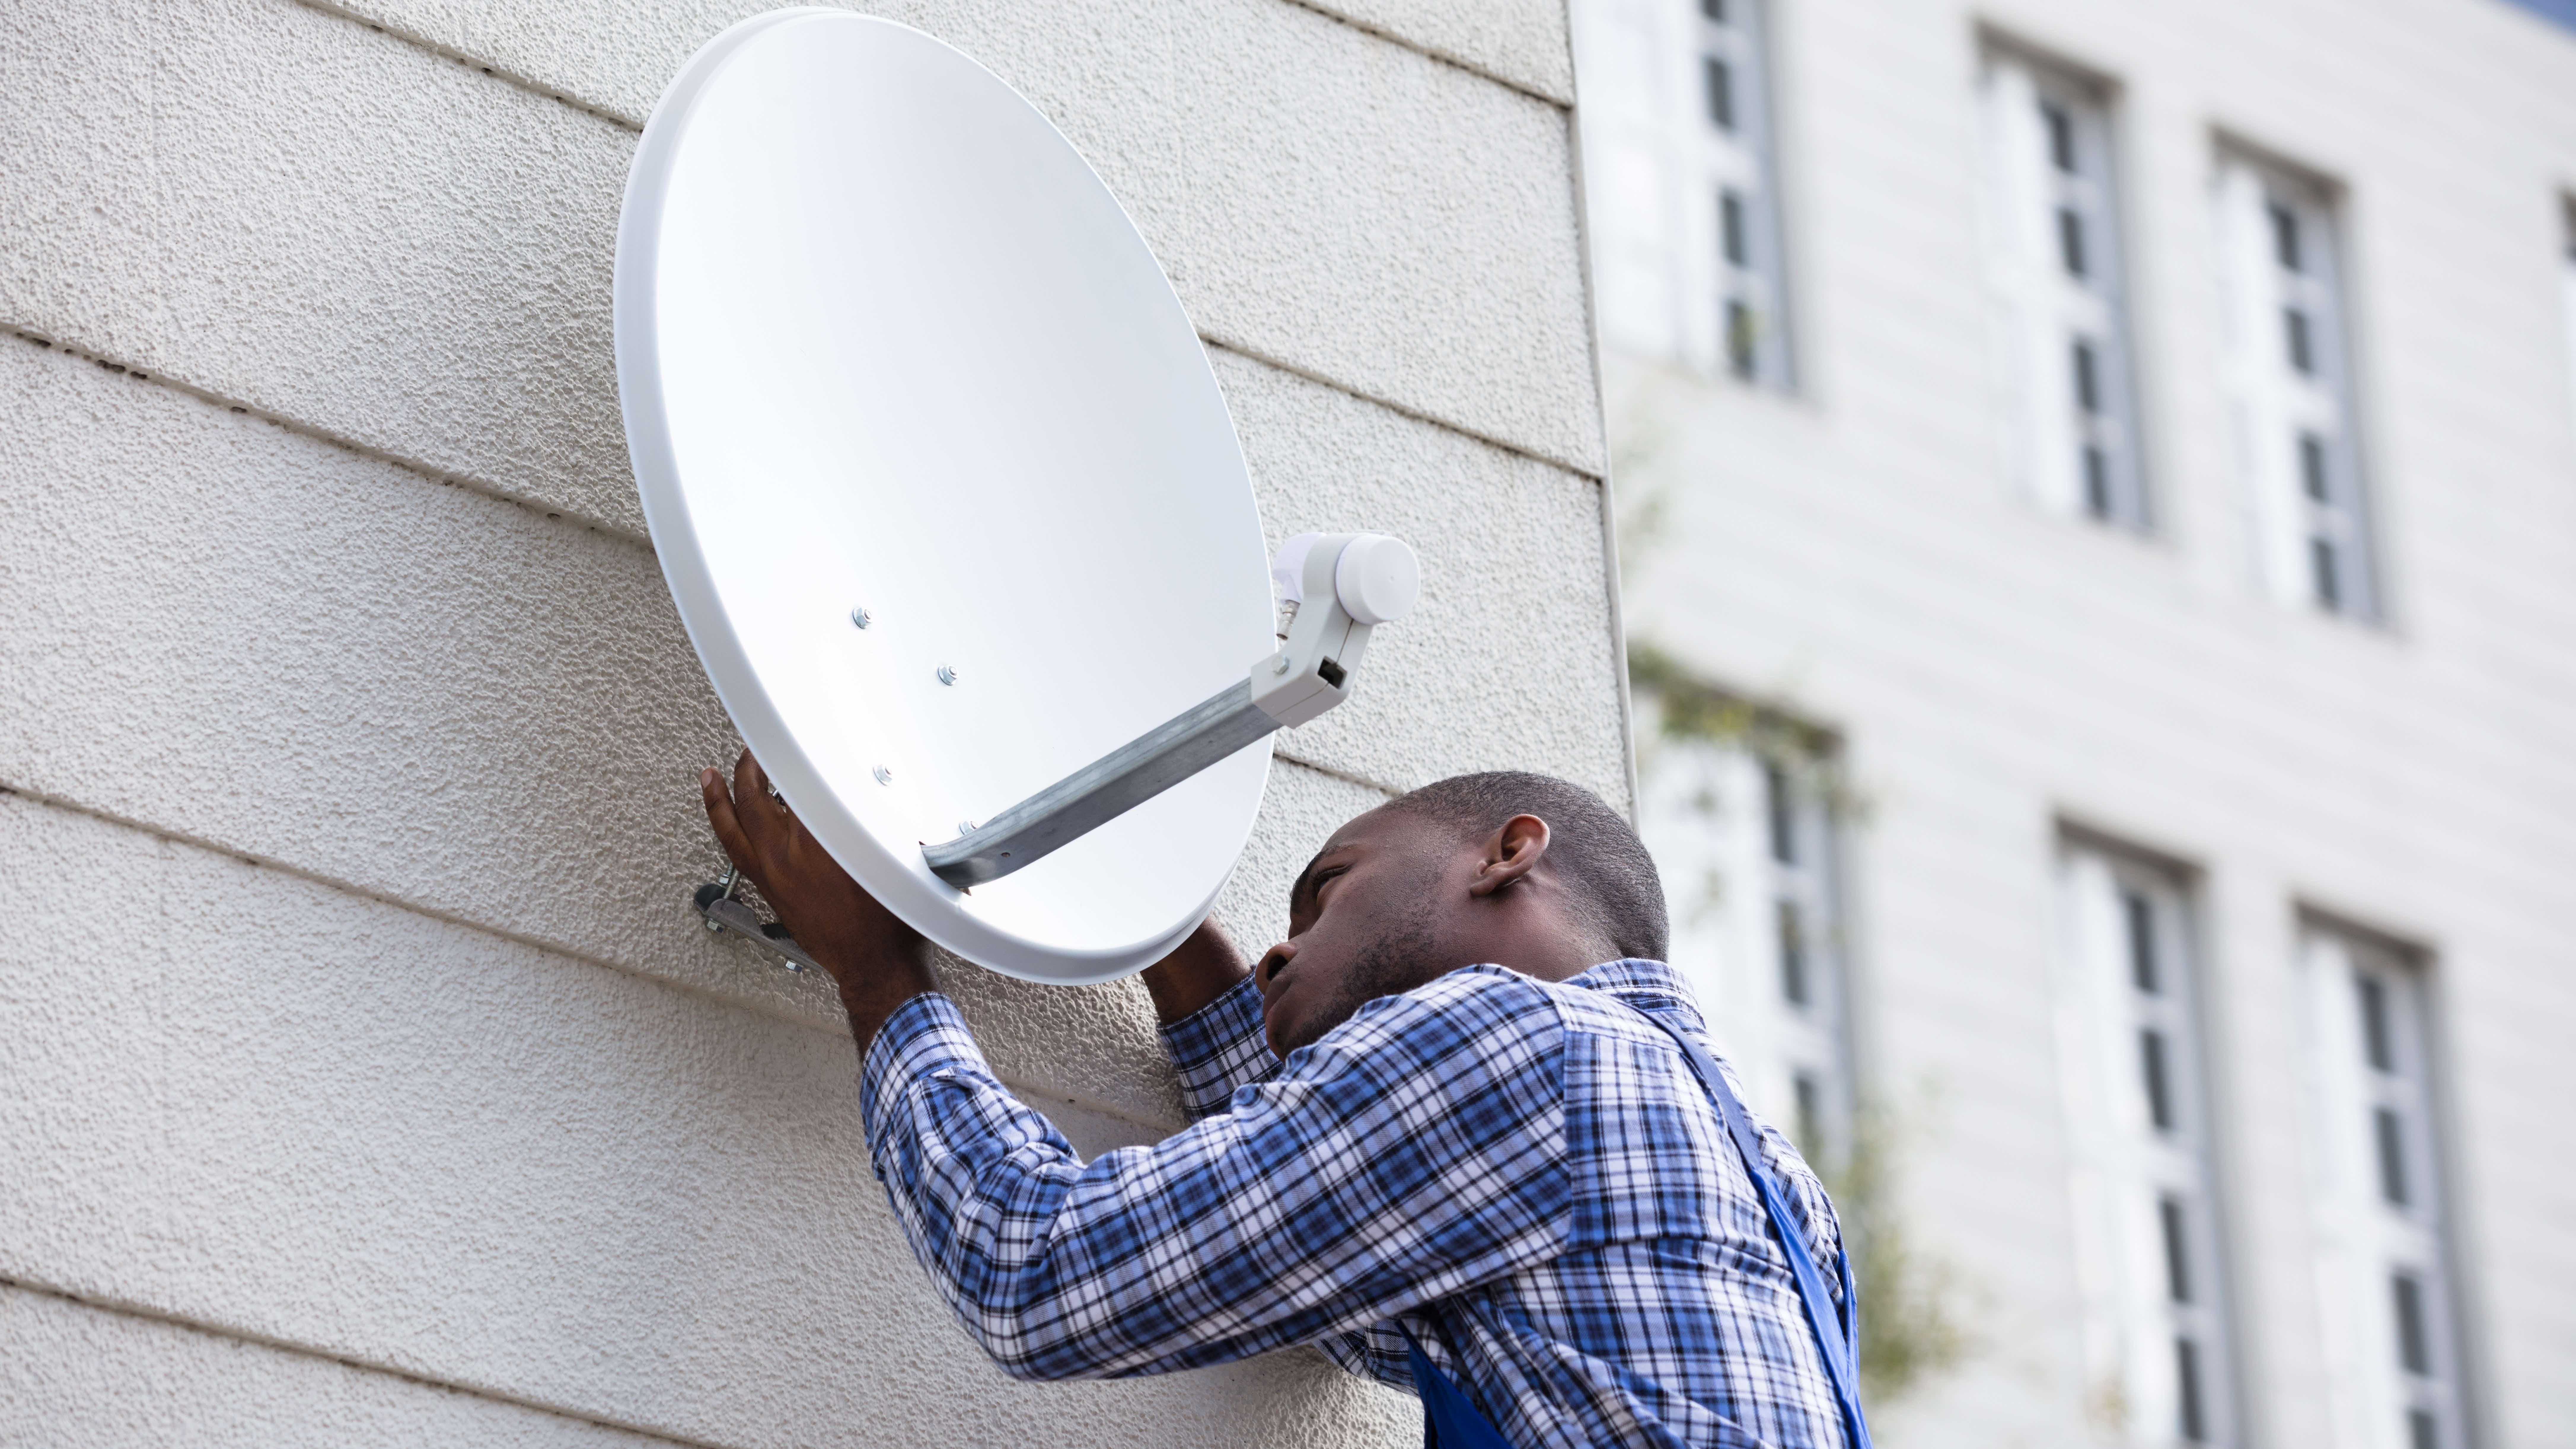 Young man installing a satellite dish in a block of flats